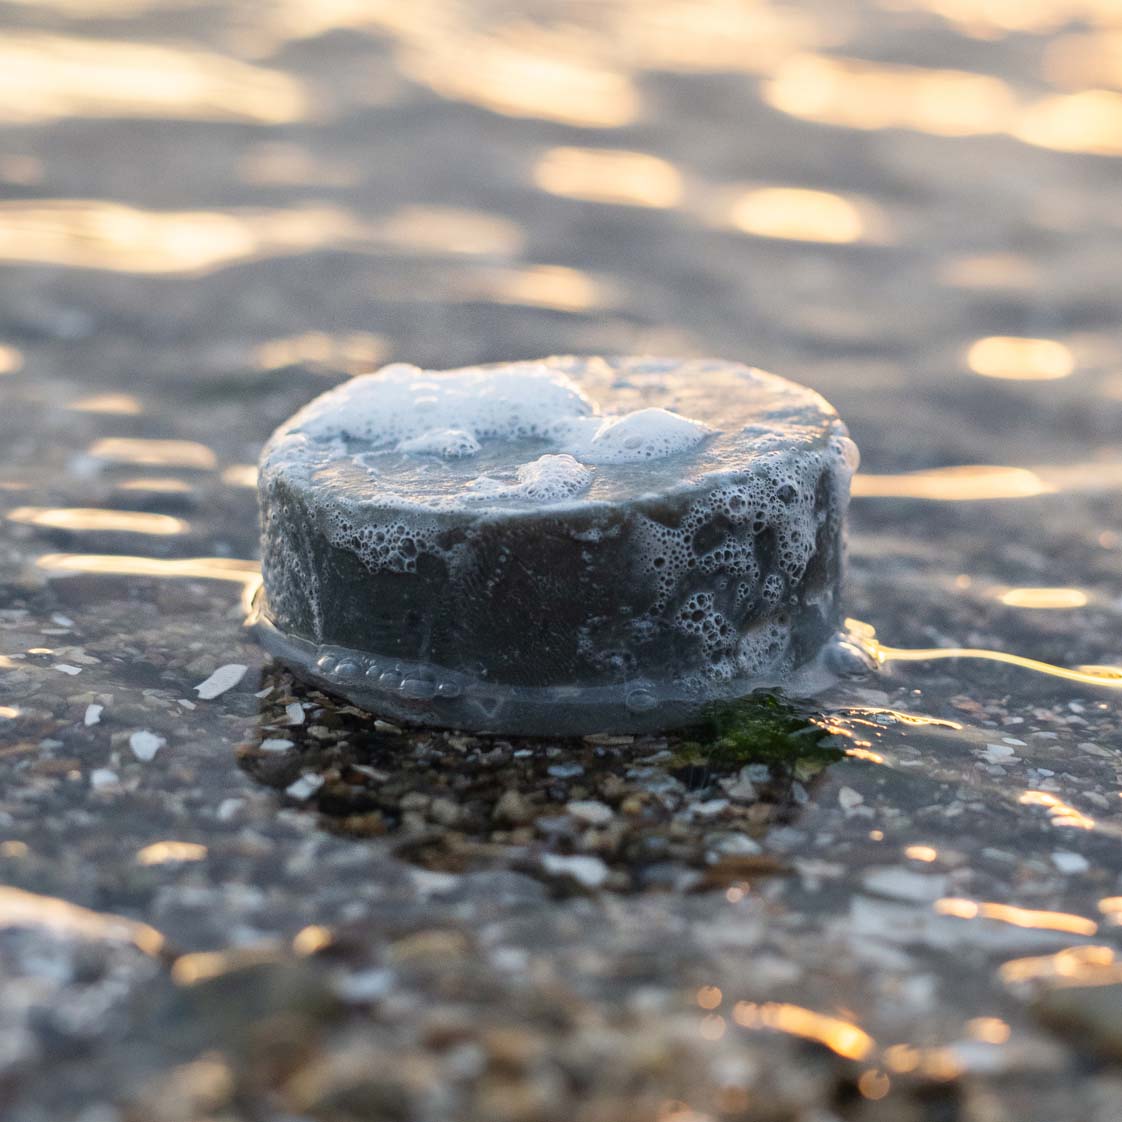 OGO Soap's Ocean Clay Cleansing Bar covered in lather, slightly immersed in the ocean.